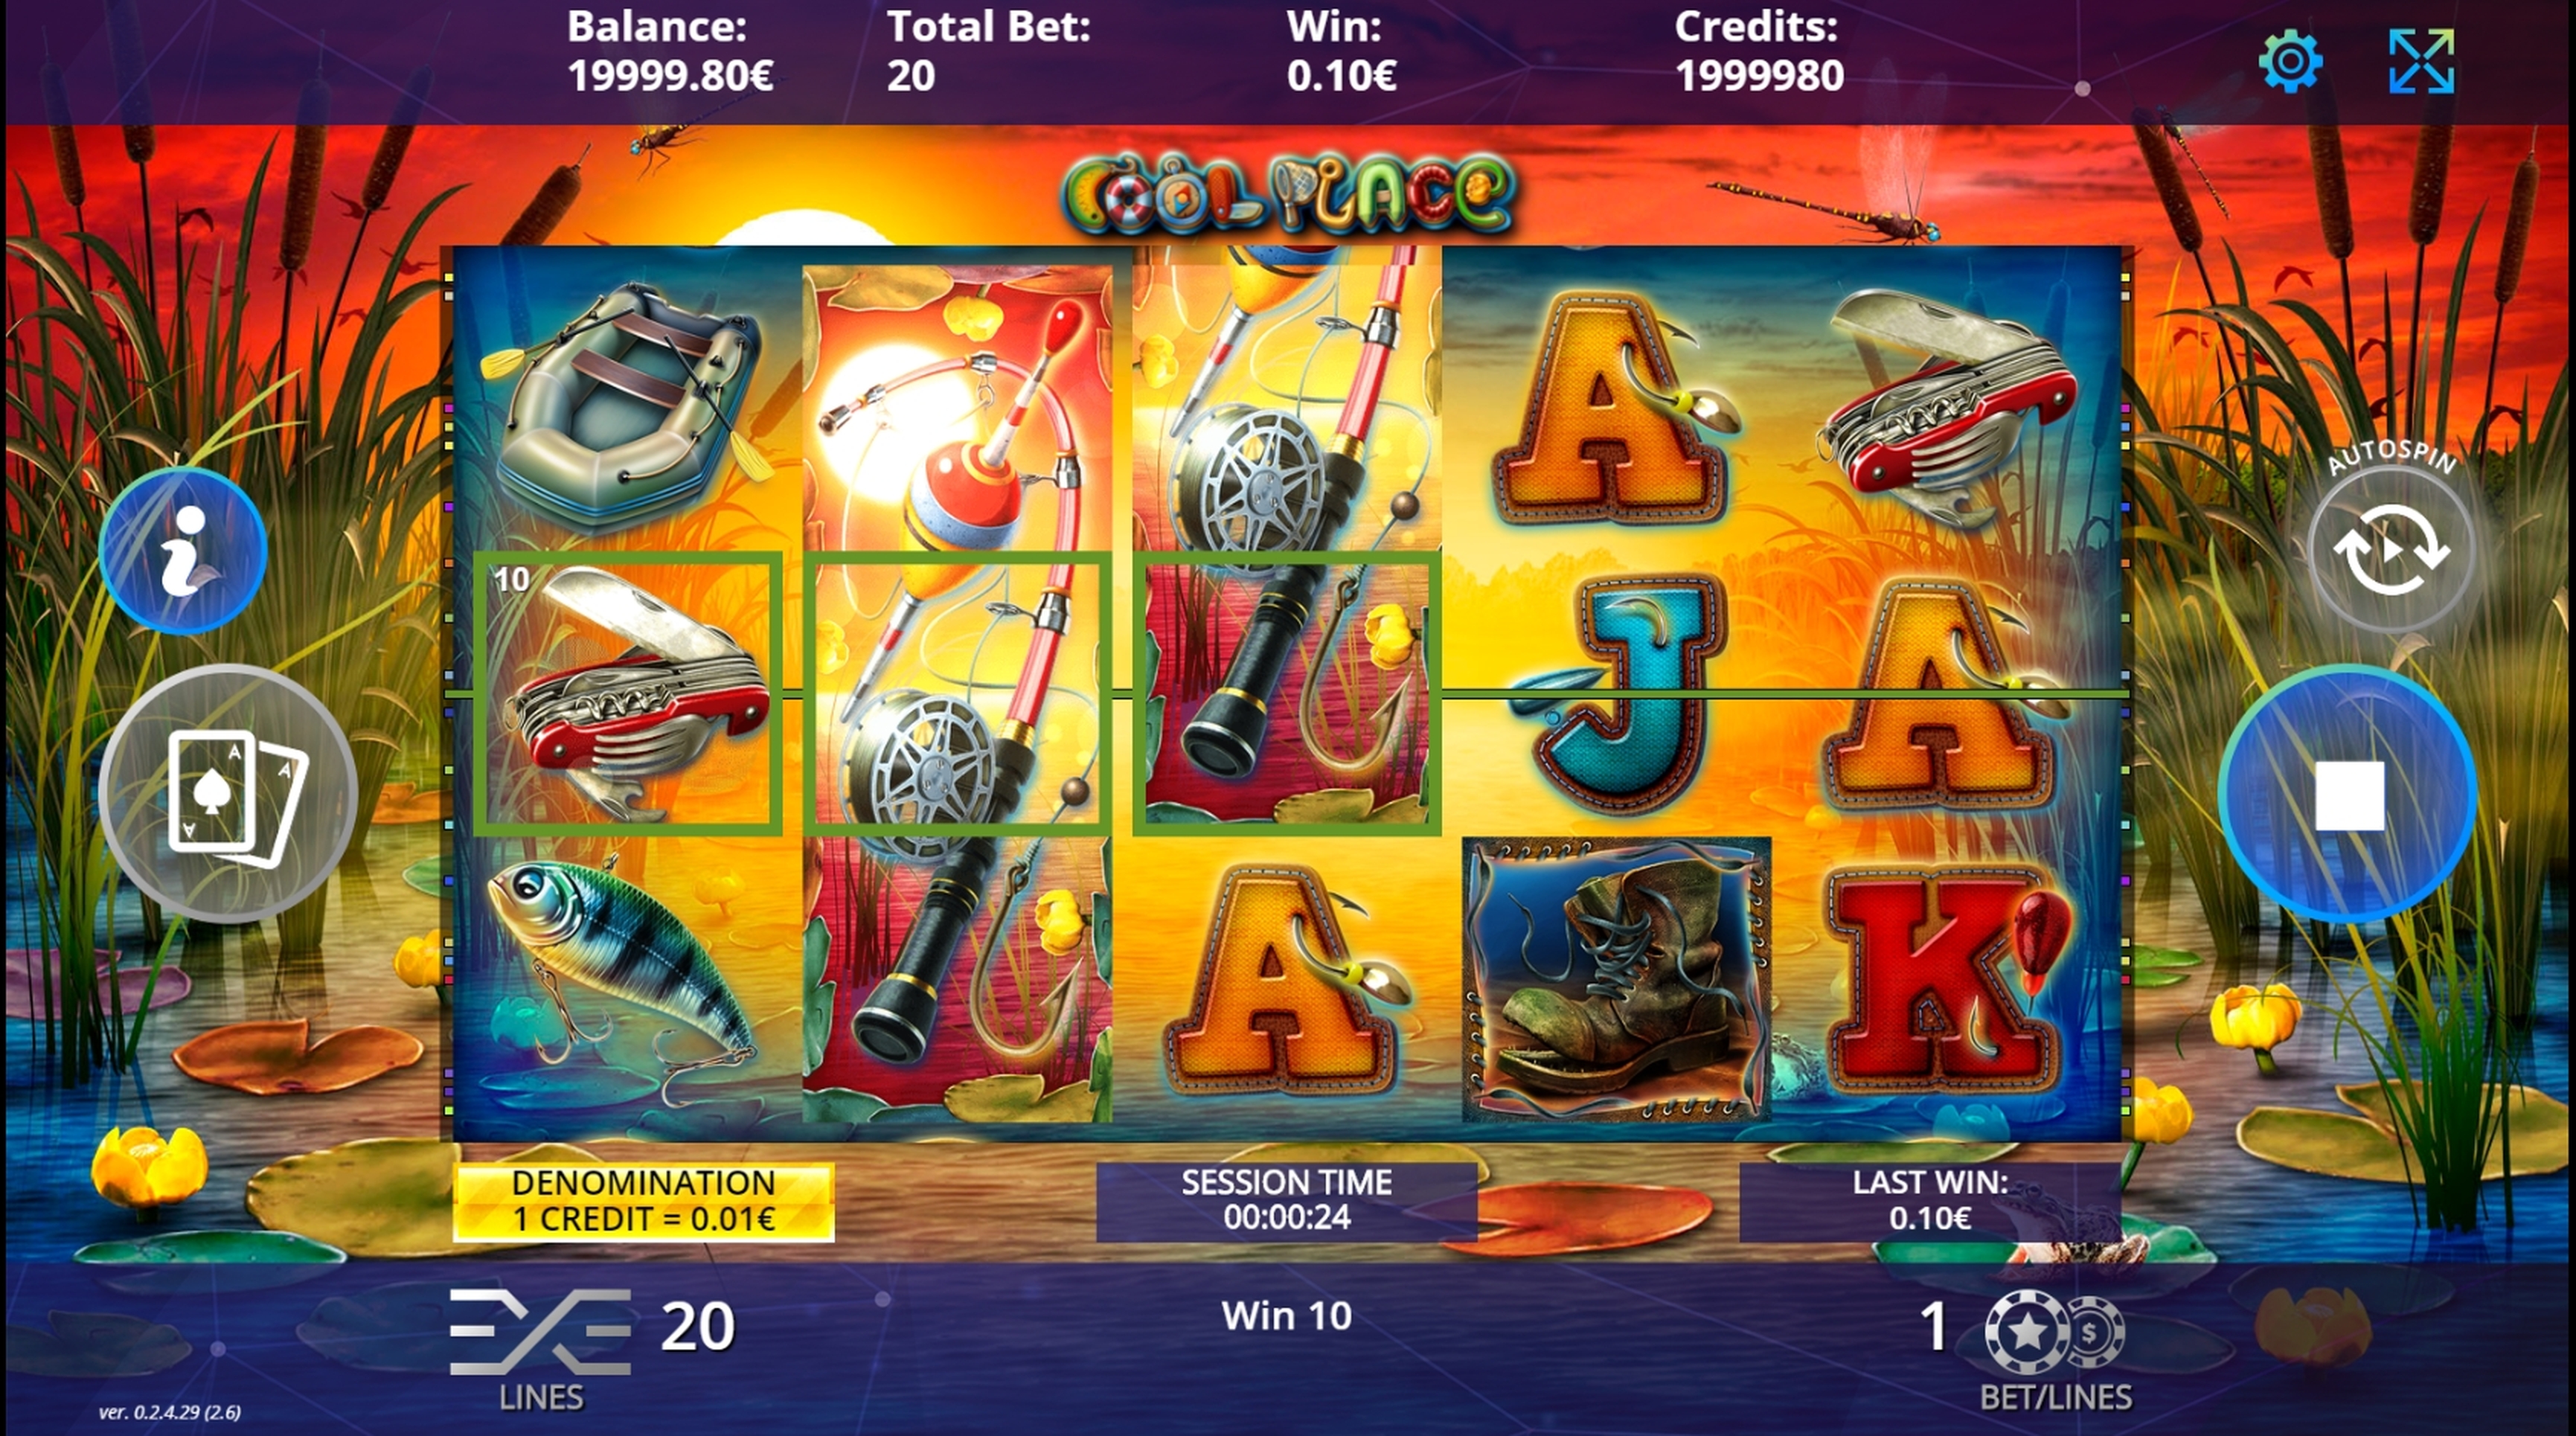 Win Money in Cool Place Free Slot Game by DLV